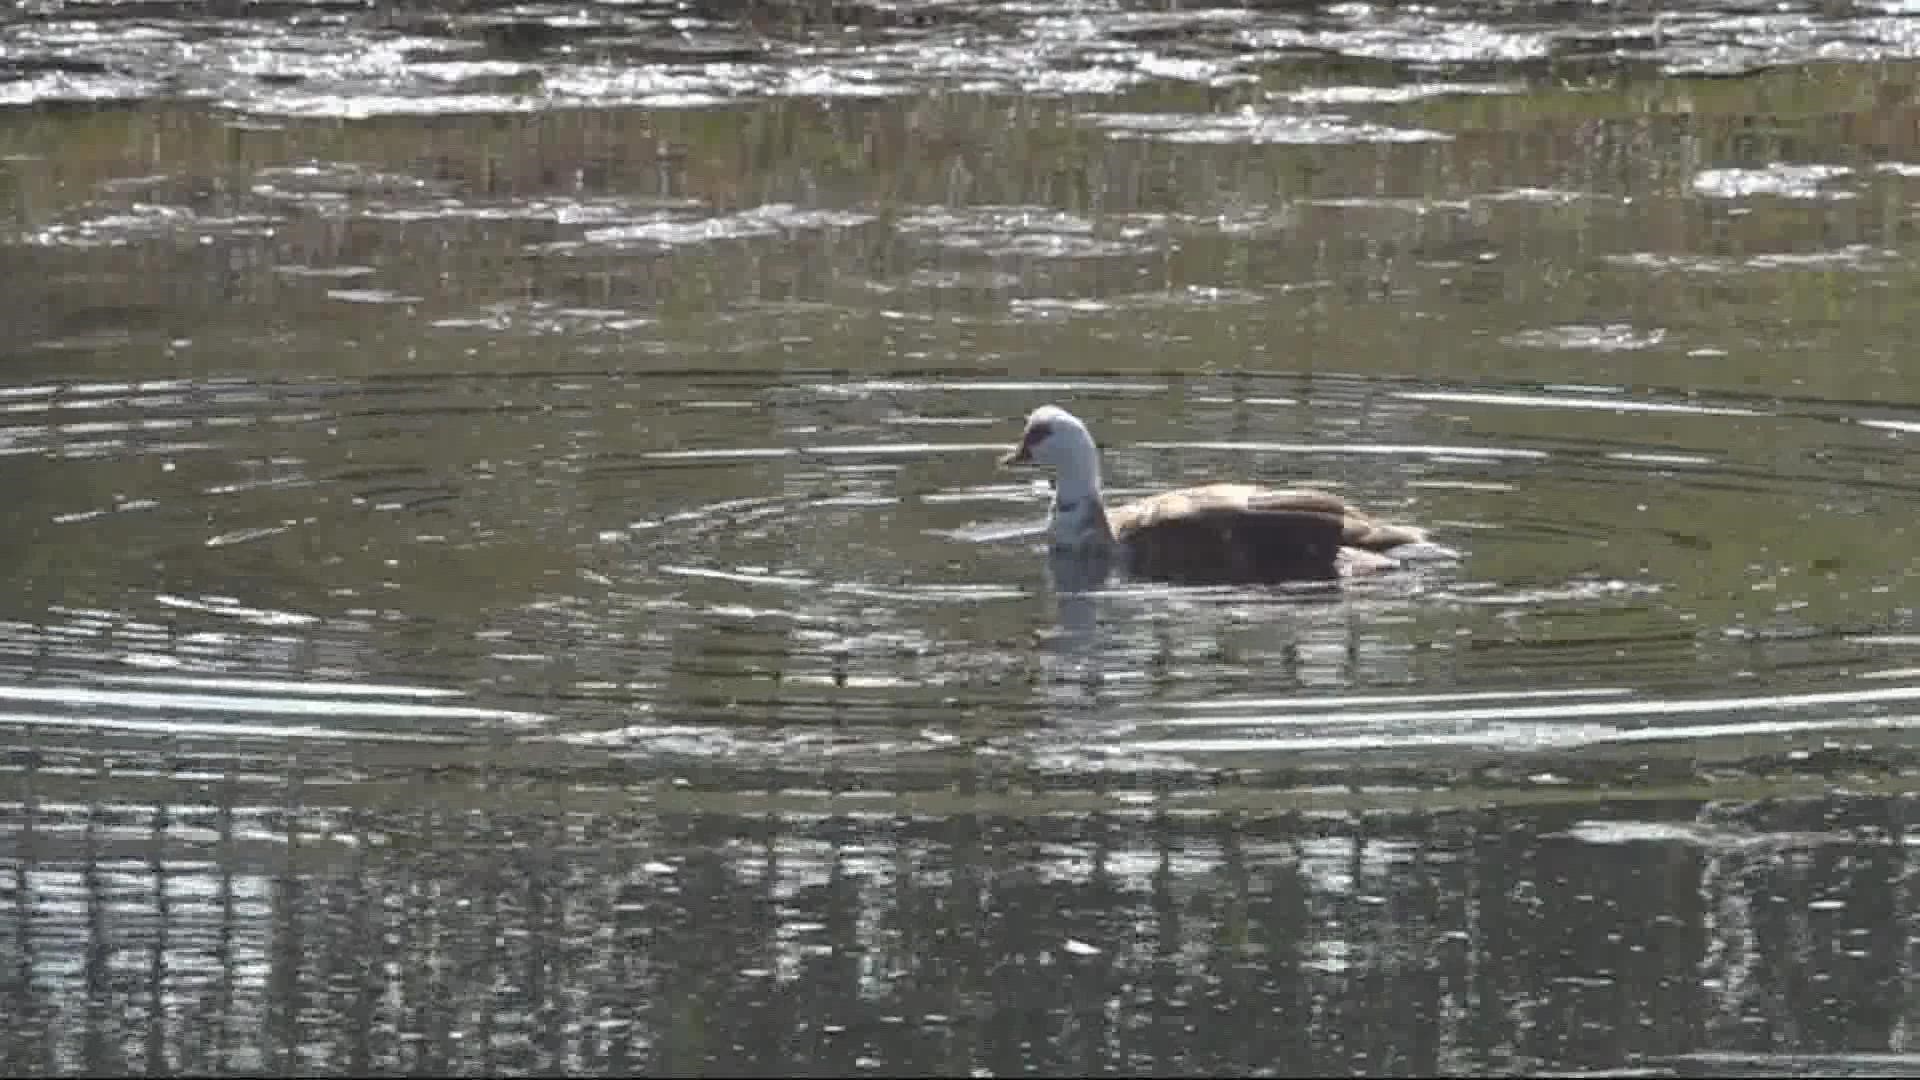 FWC said it's performing a necropsy to determine what is killing the birds. It said it could be bird flu and is urging residents to stay away from the ducks for now.